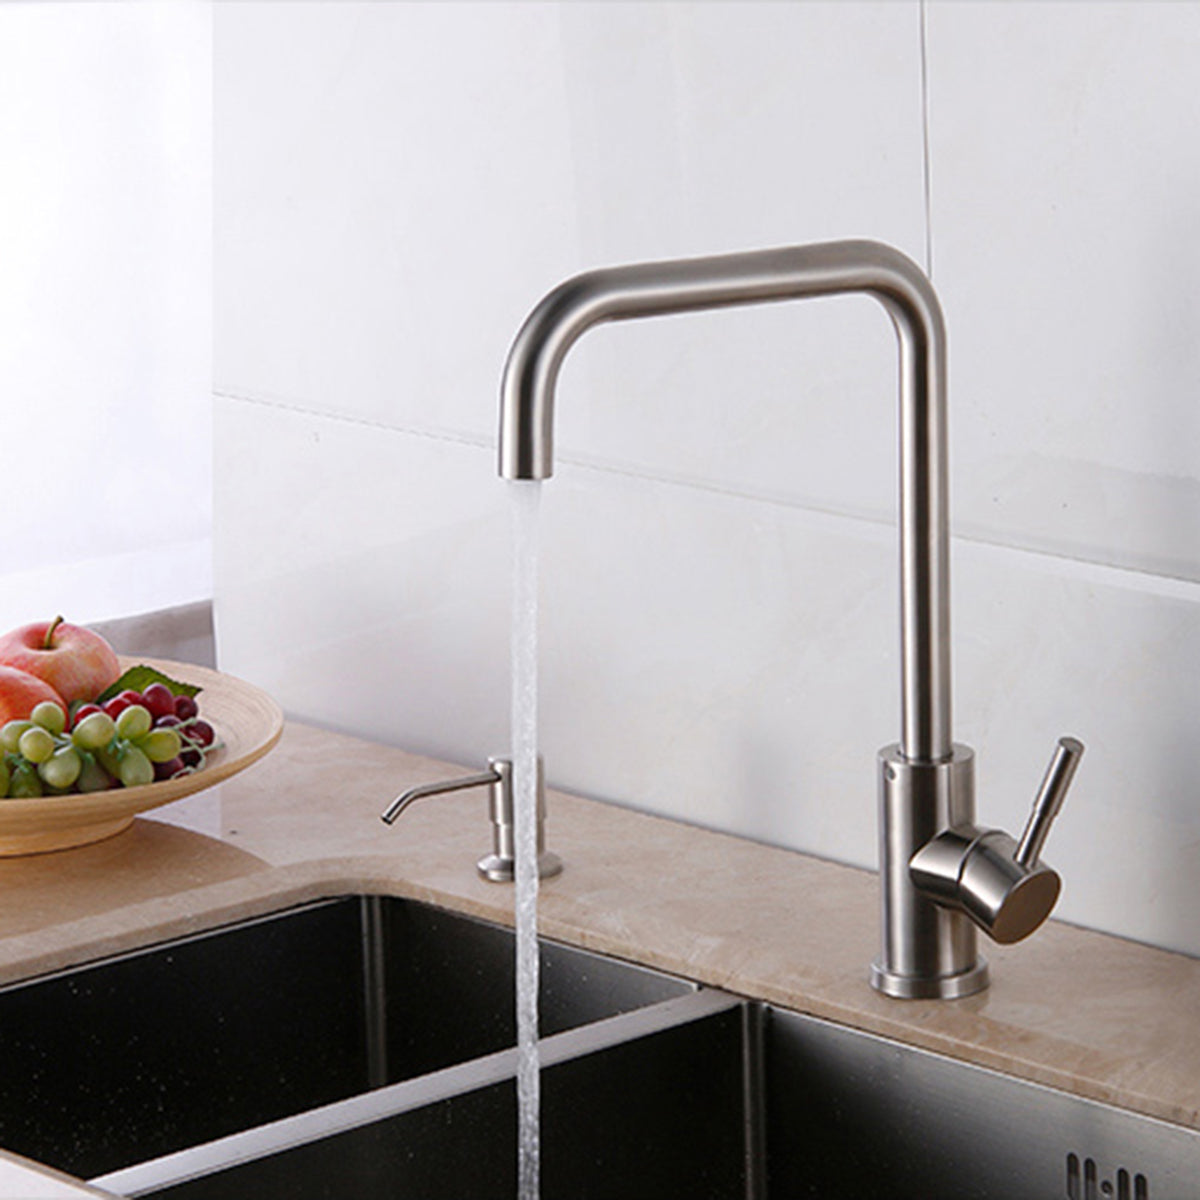 304 Stainless Steel Burnished Faucet Kitchen Hot And Cold Water Mixer Single Handle Rotation Tap